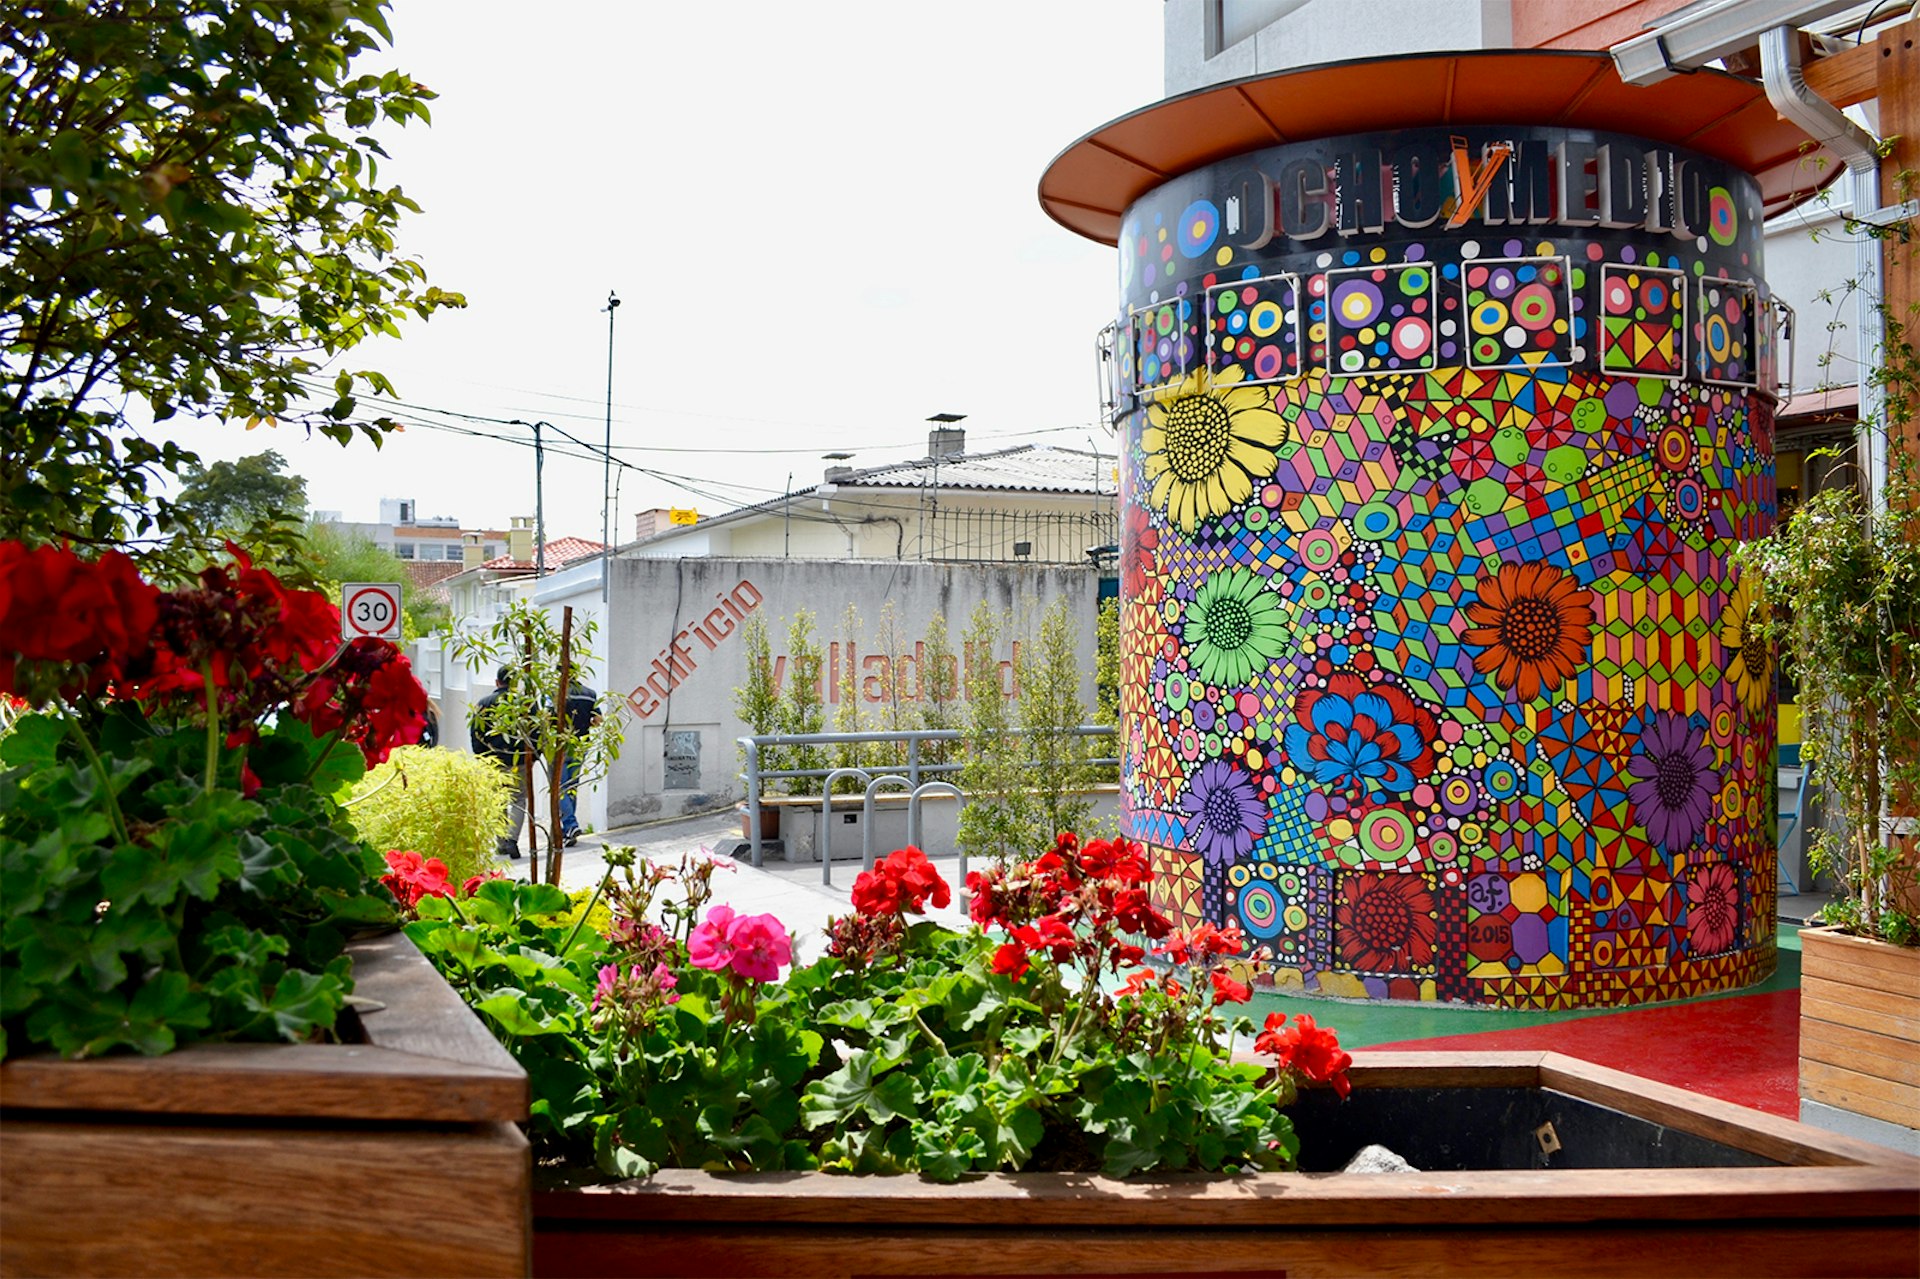 A show of the cinema exterior covered in street art, with flowers in the foreground © Julia Eskins / Lonely Planet